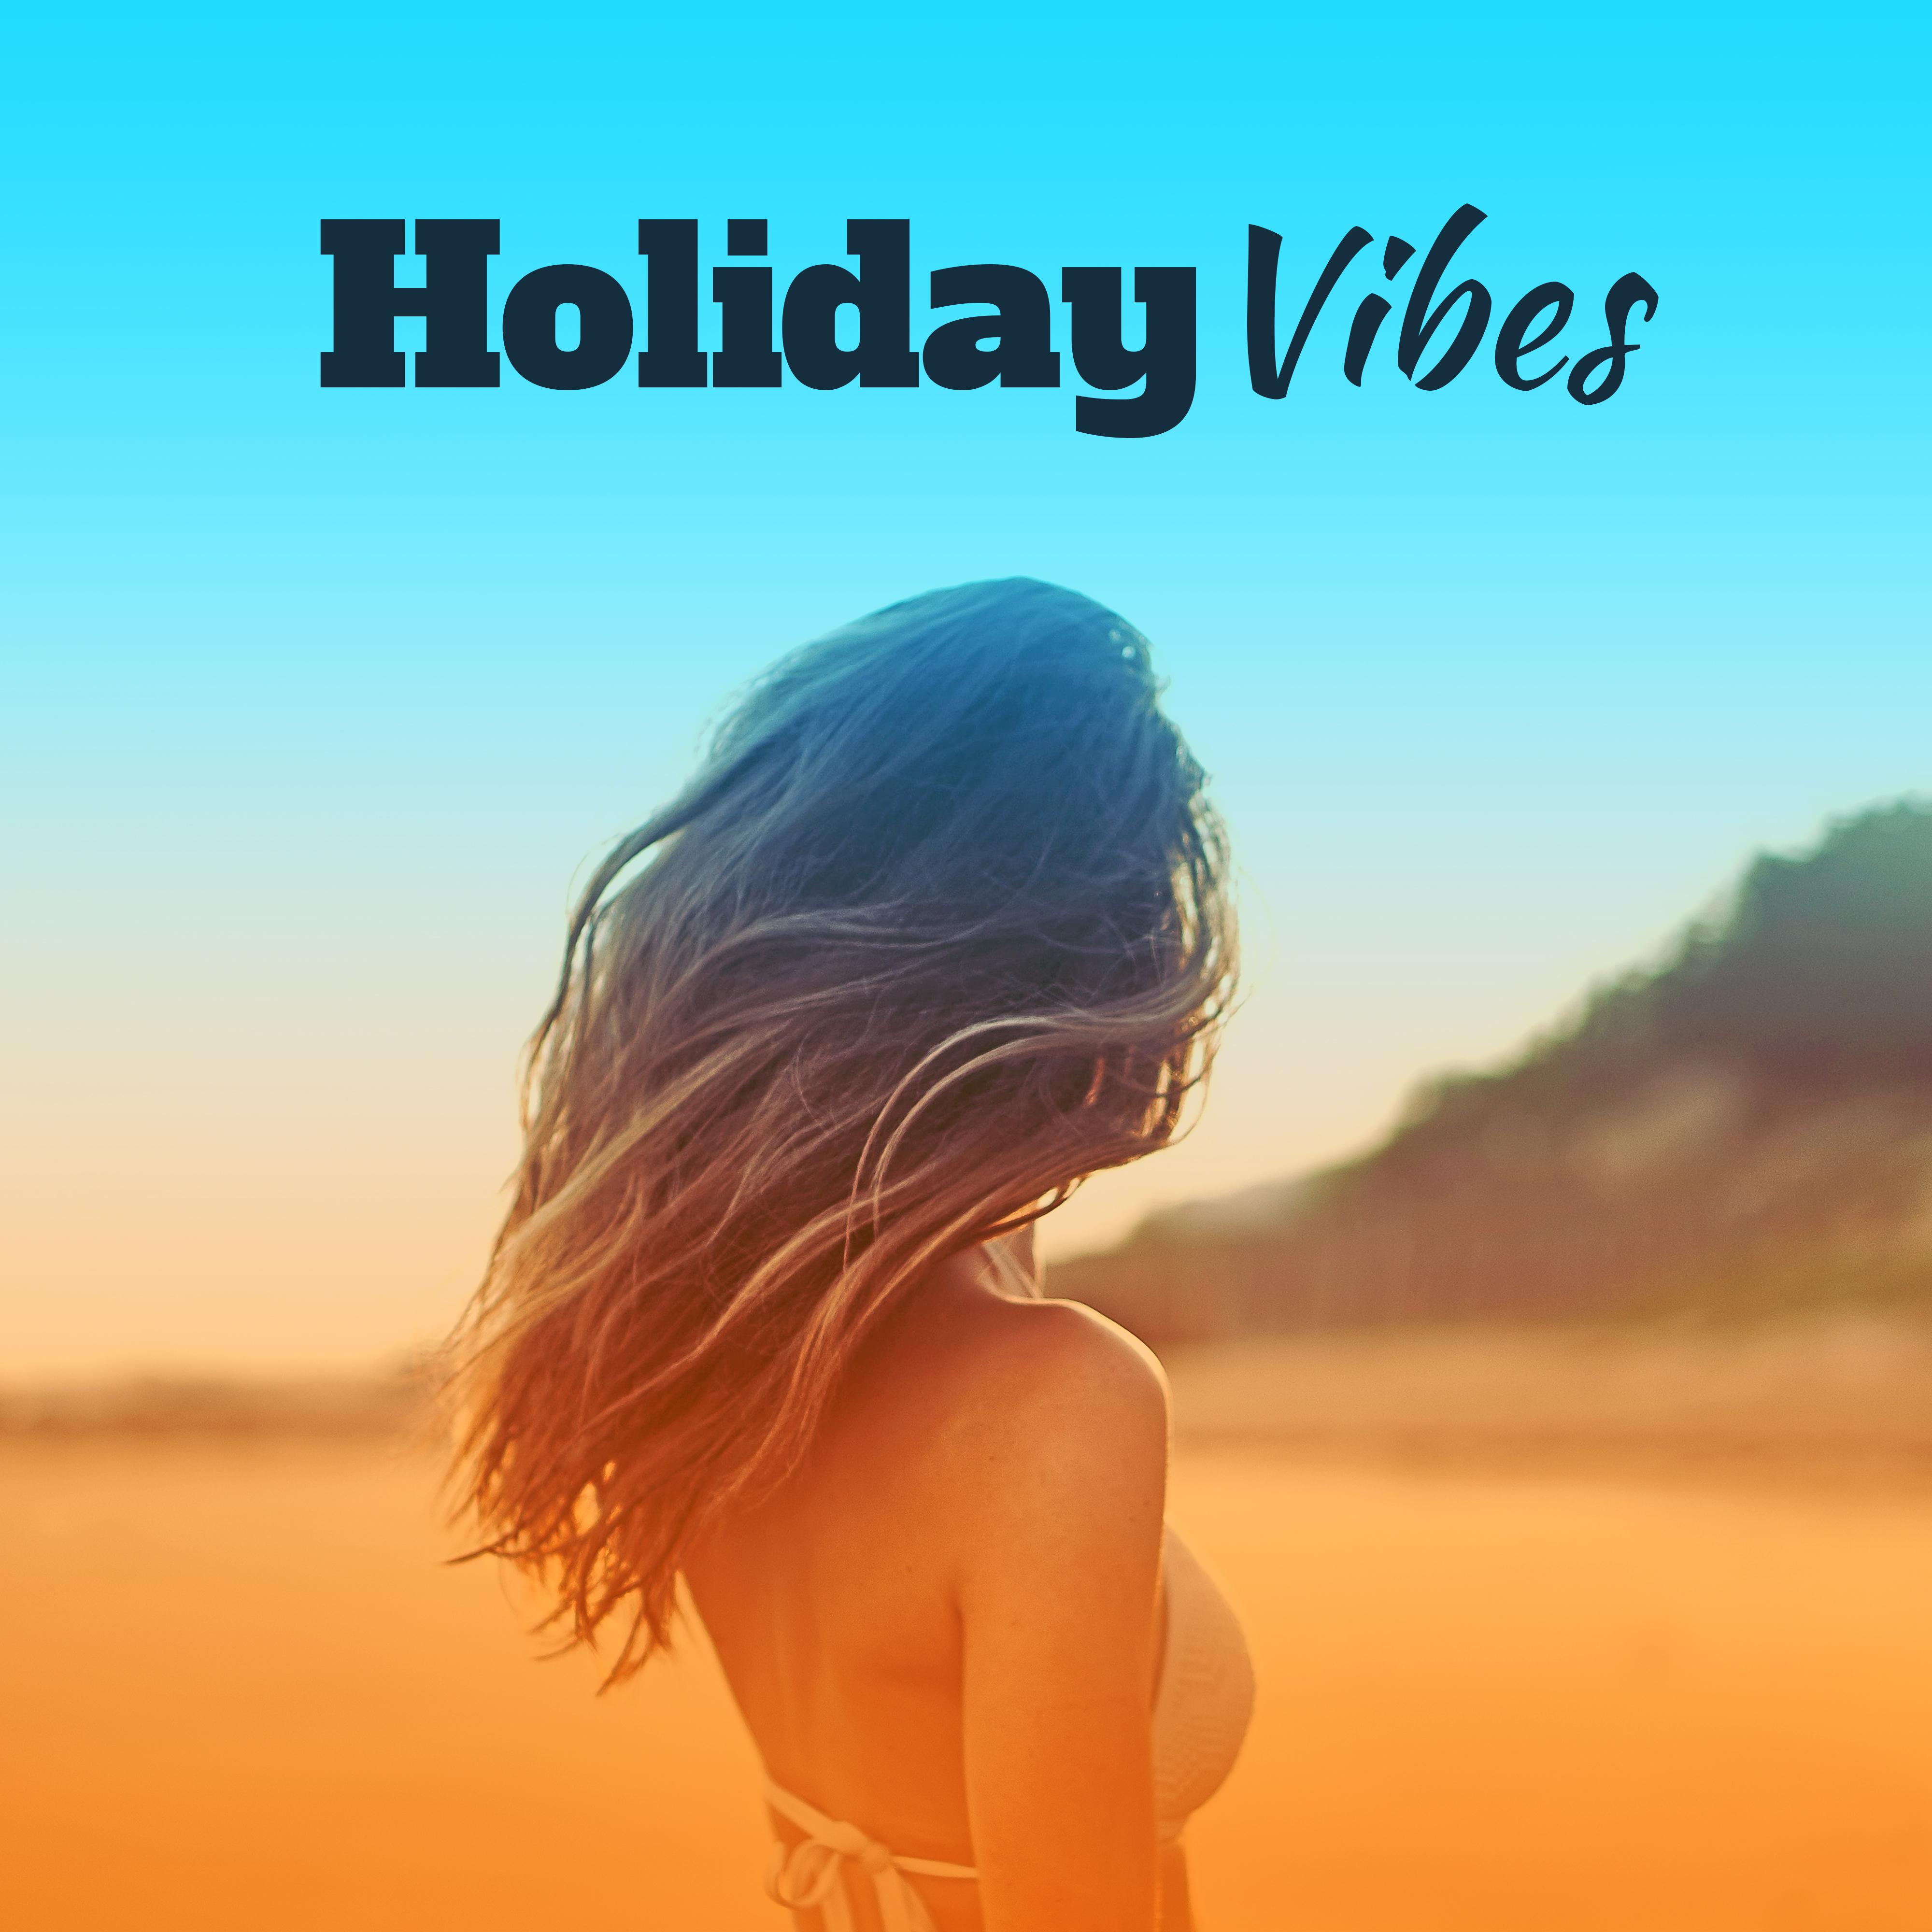 Holiday Vibes – Summer Hits, Chill Out 2017, Perfect Relax, Beach Chill, Summertime, Tropical Rest